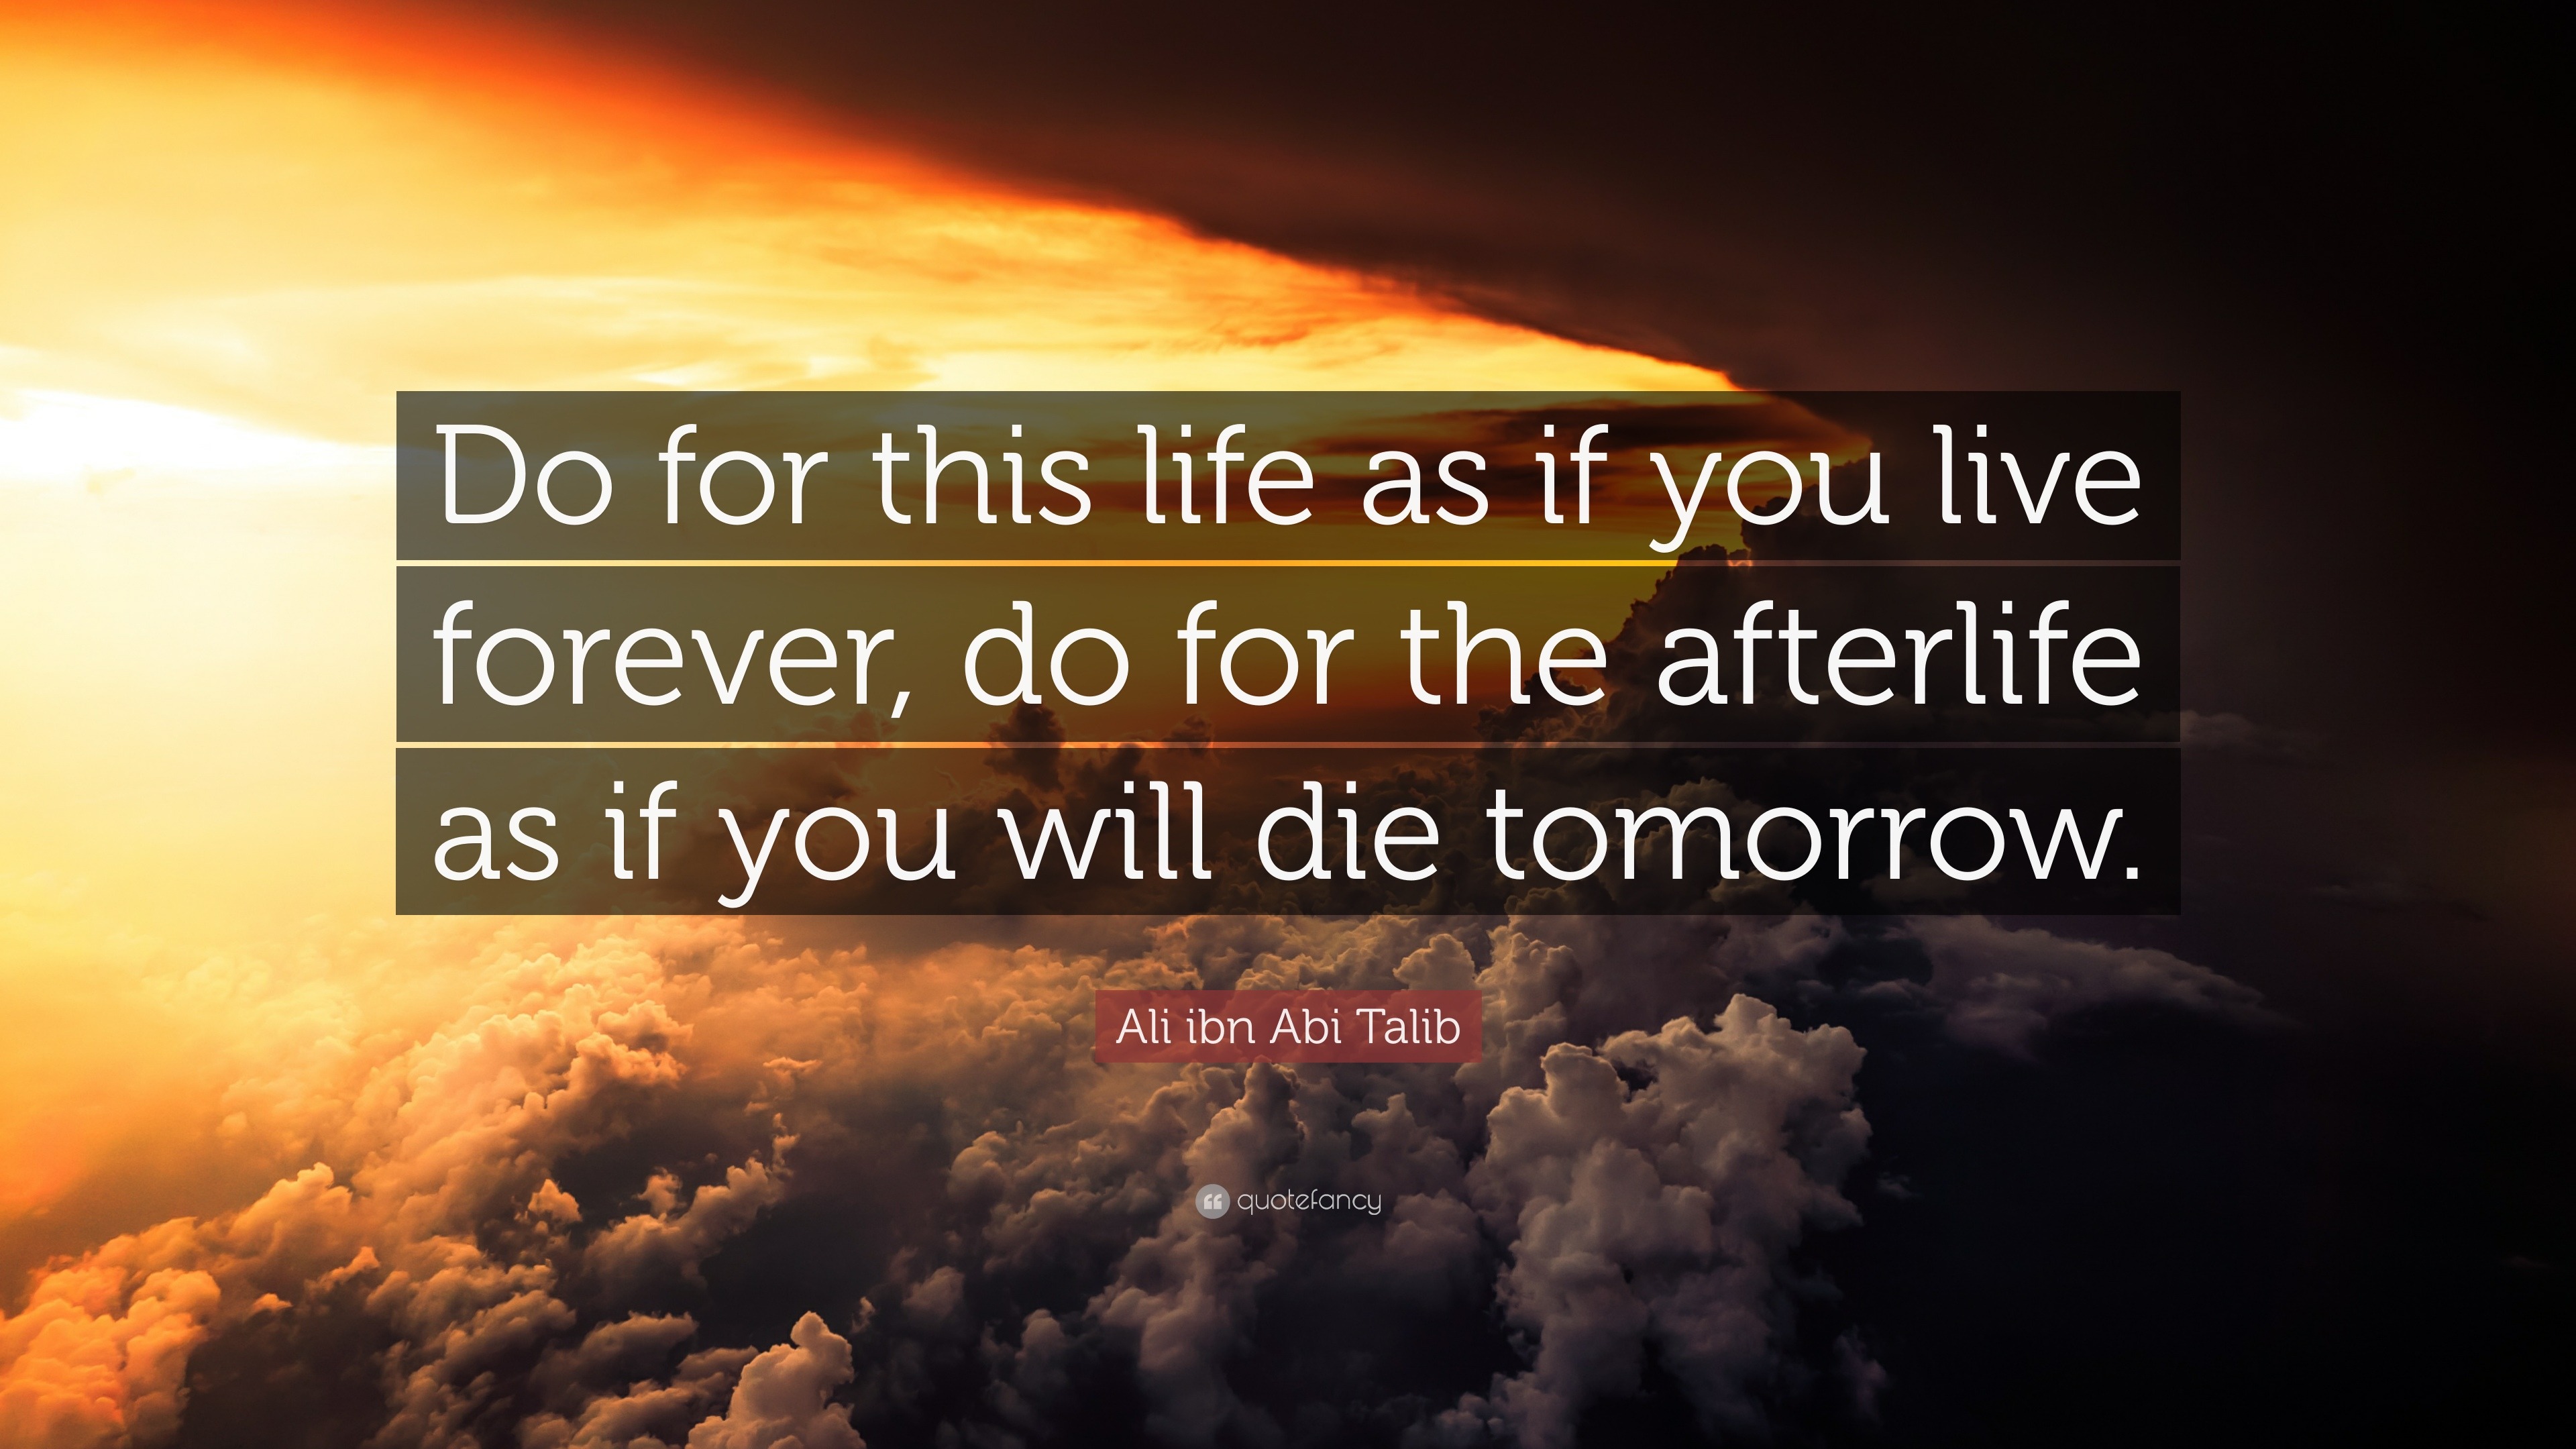 Ali Ibn Abi Talib Quote Do For This Life As If You Live Forever Do For